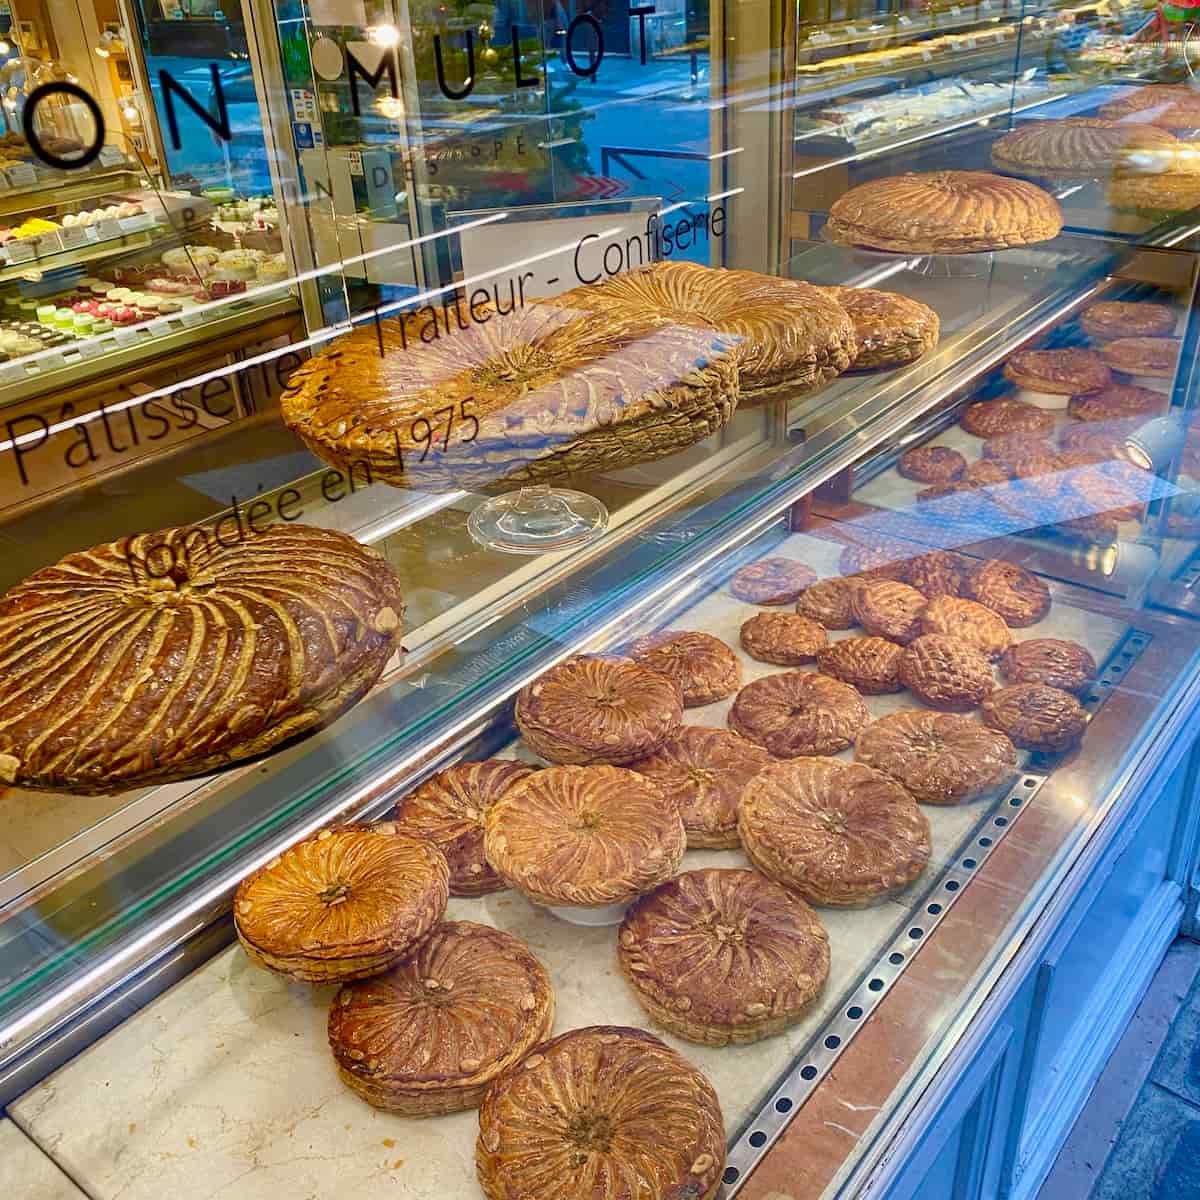 Parisian bakery window filled with galettes des rois King cakes